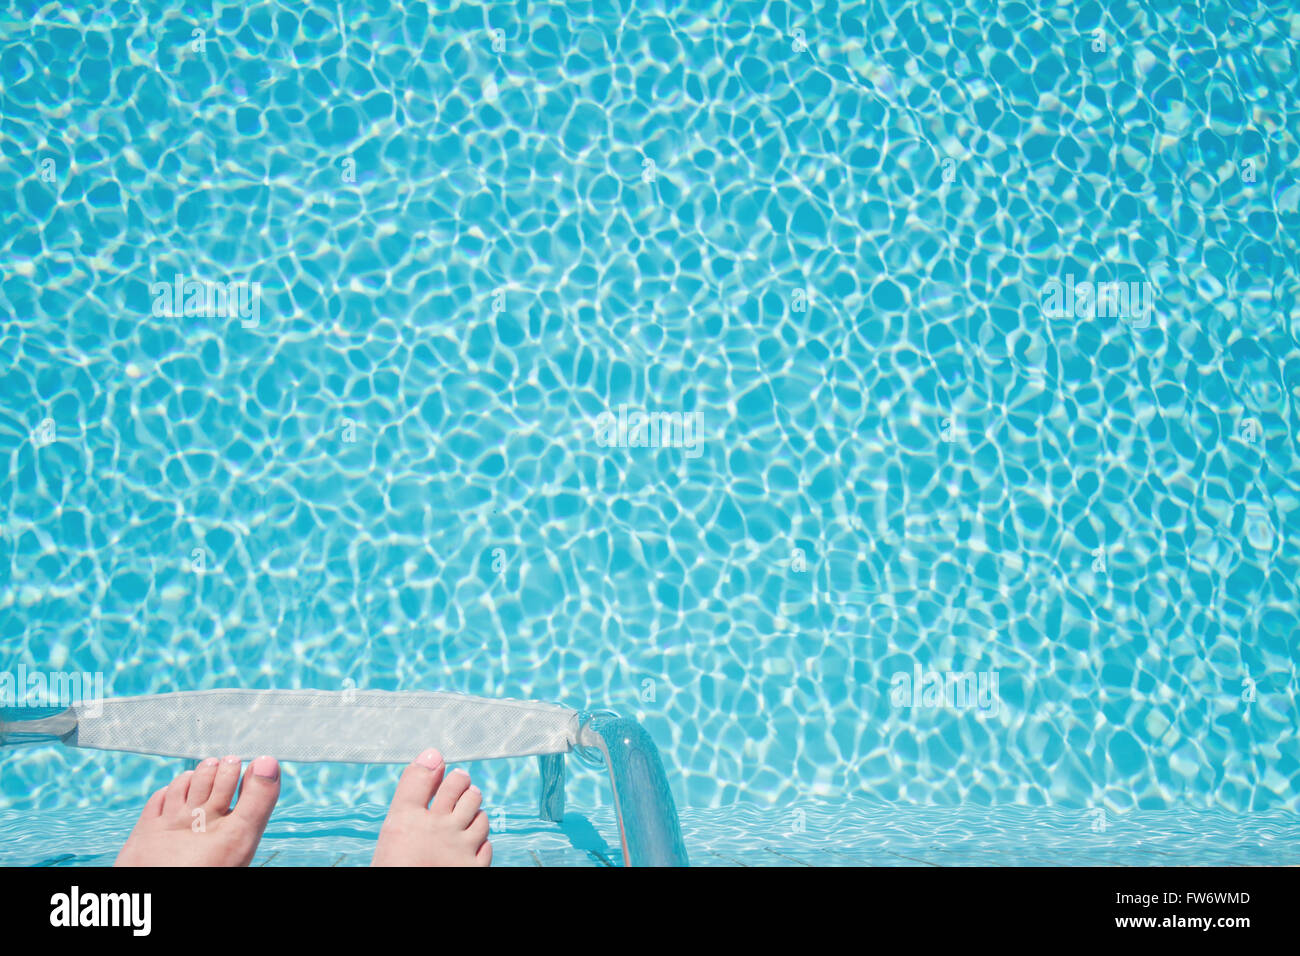 Feet about to climb down ladder into a crystal clear sparkling pool Stock Photo